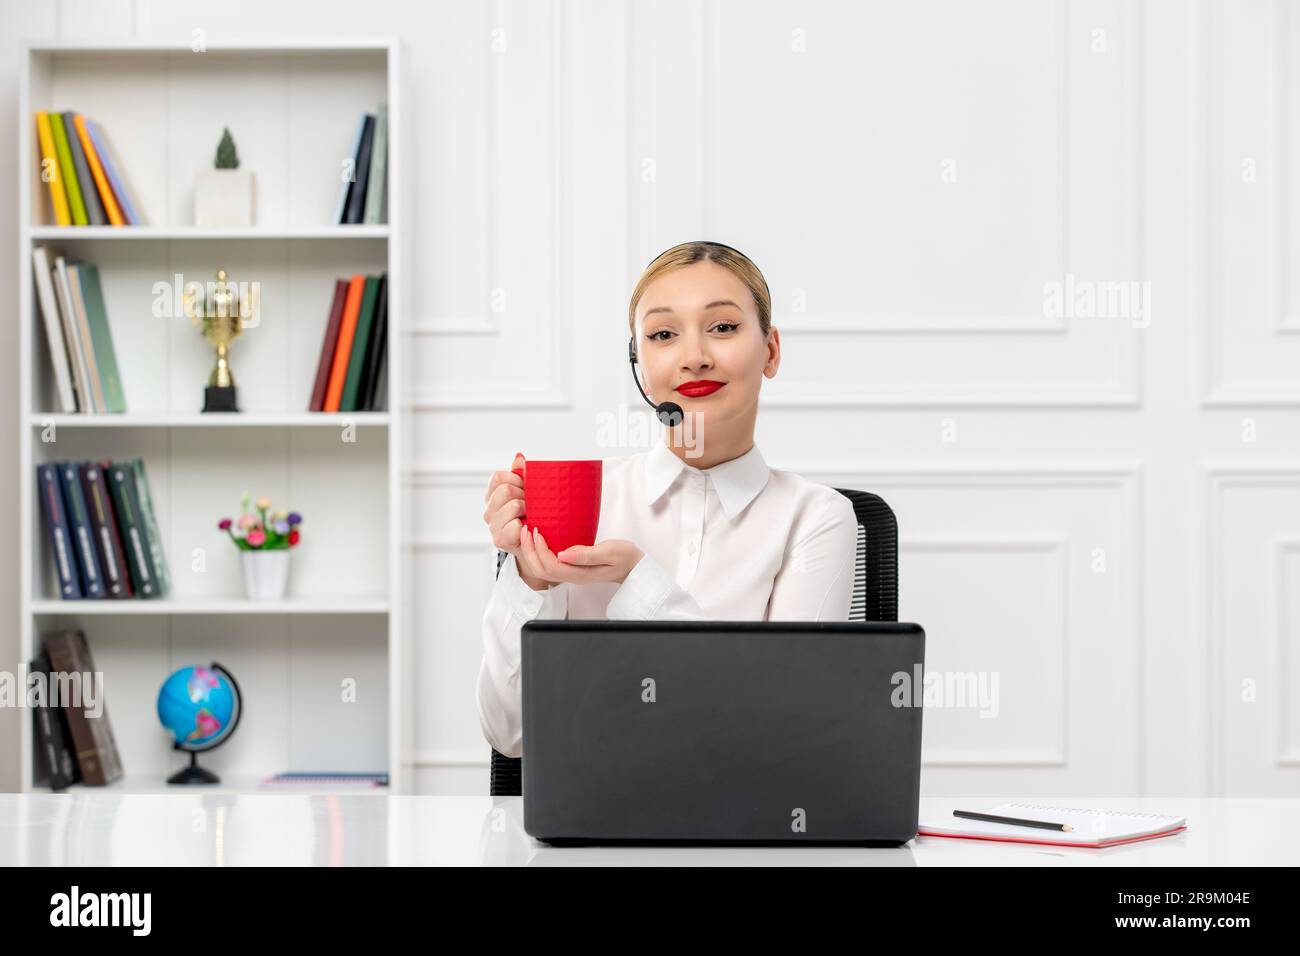 customer service cute blonde girl office shirt with headset and computer holding a red cup Stock Photo